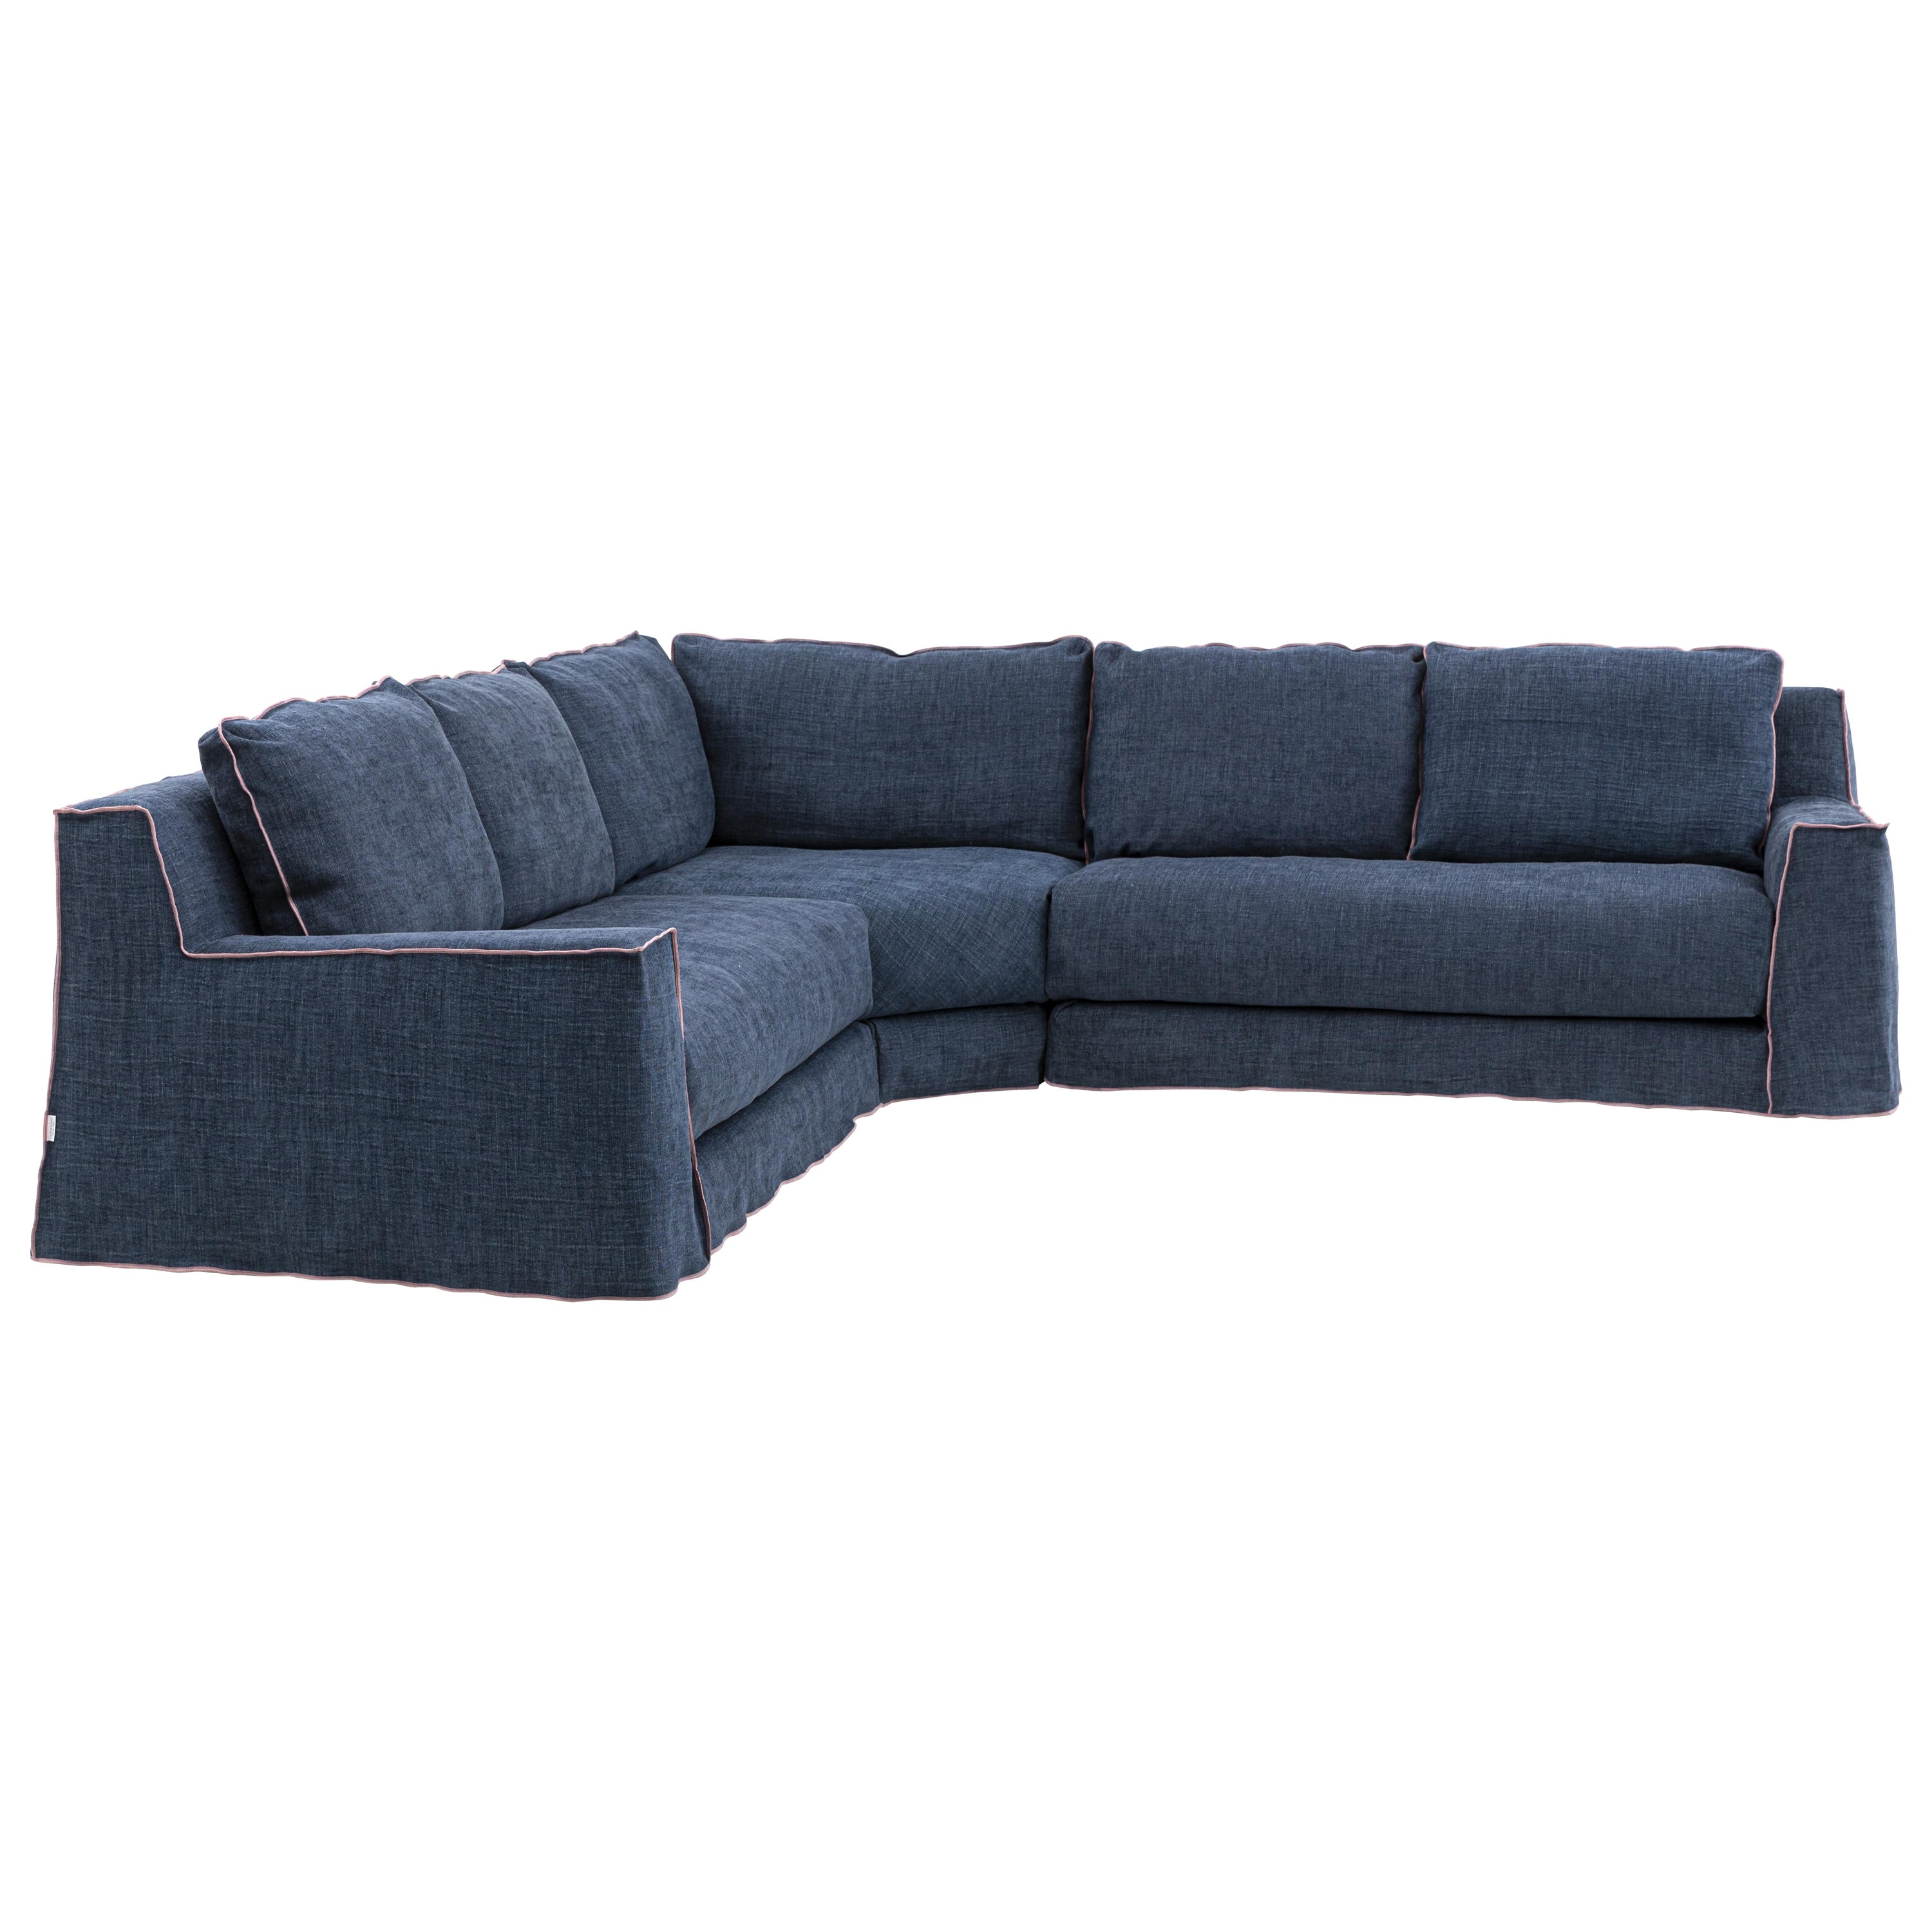 Gervasoni Loll 7 Modular Sofa in Munch Upholstery by Paola Navone For Sale